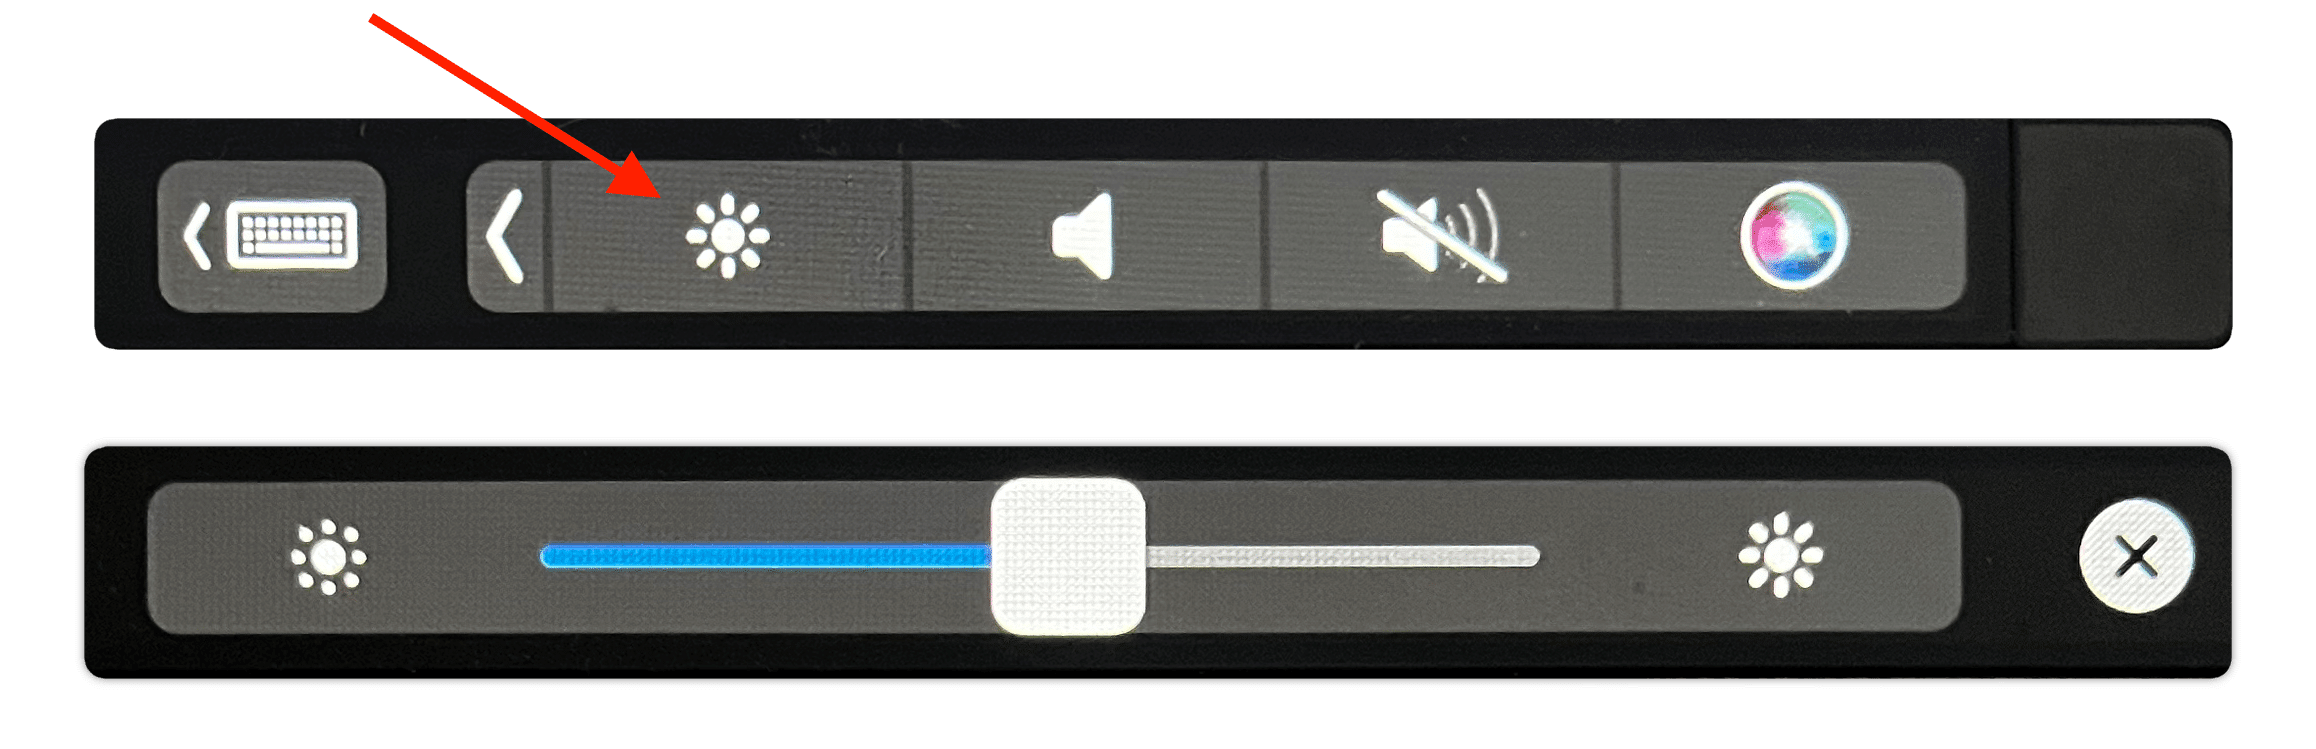 Touch bar showing the brightness icon